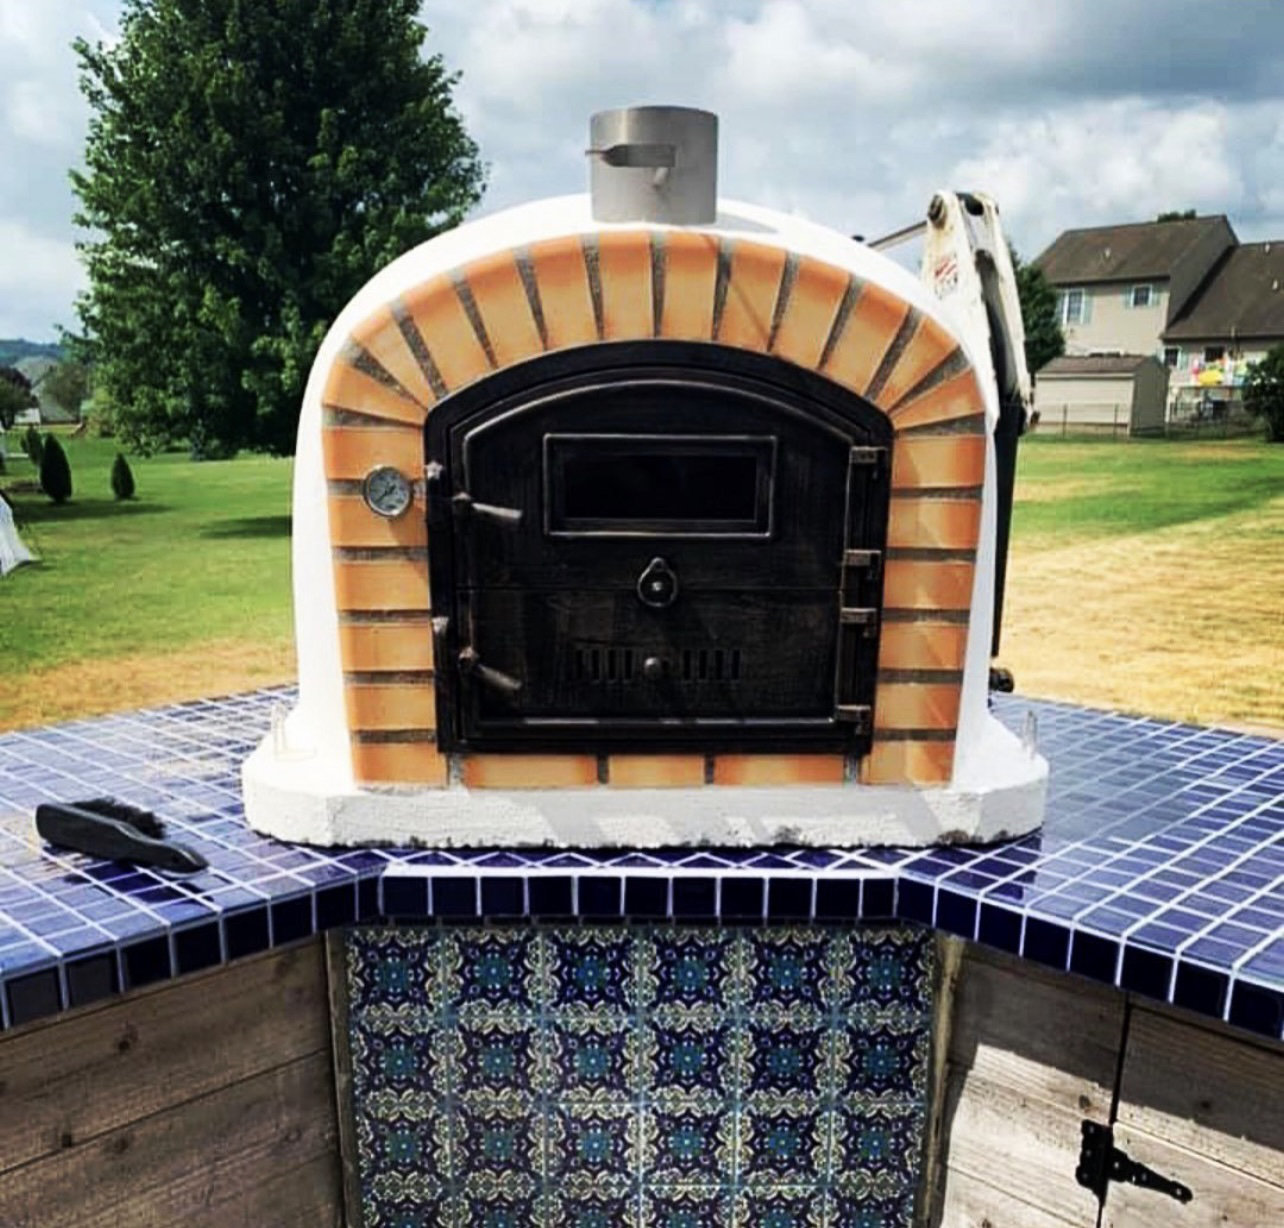 Brick Commercial Pizza Oven - Available in 3 Sizes